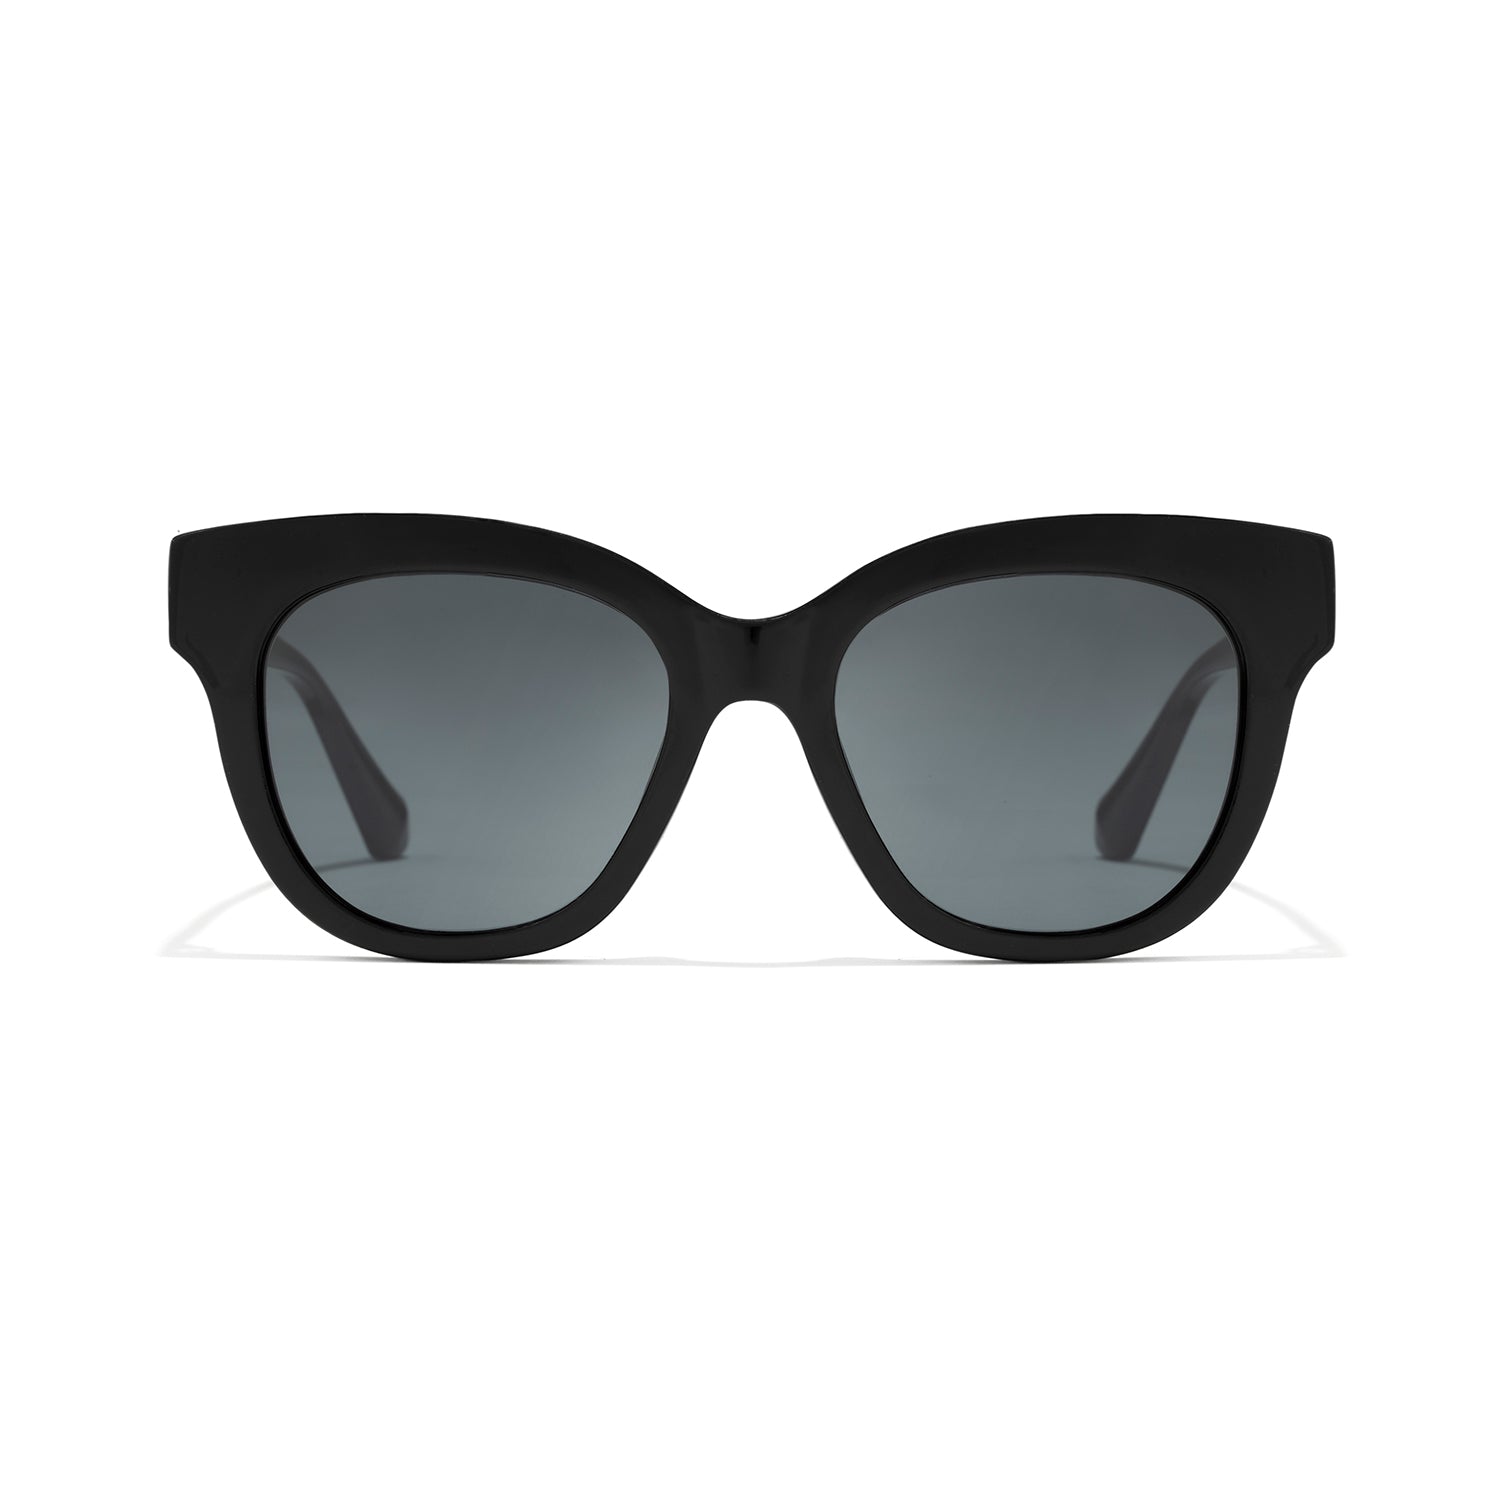 HAWKERS - AUDREY Black For Men and Women UV400